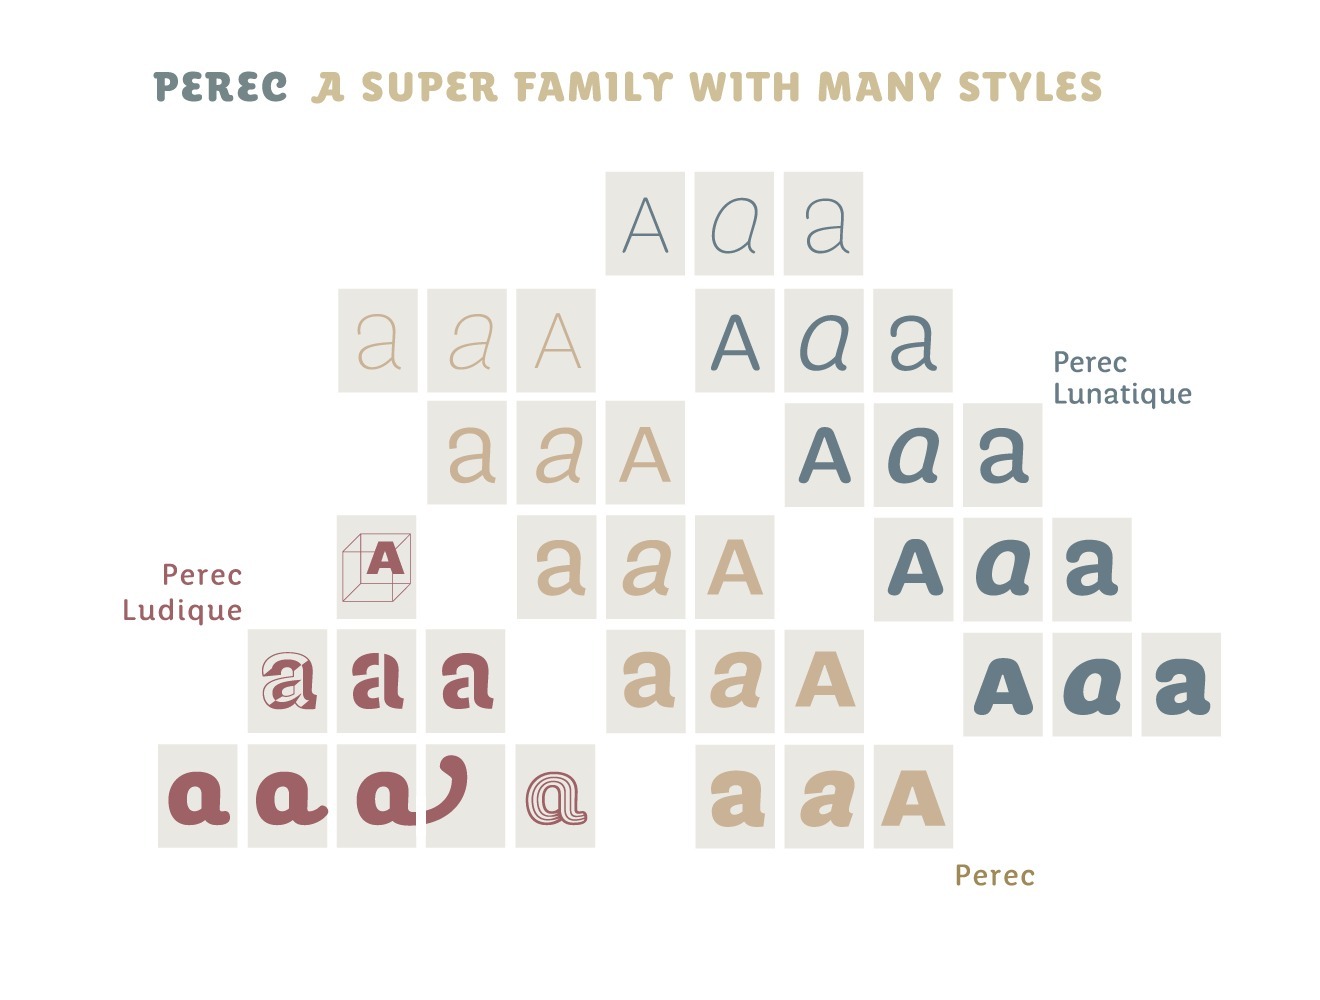  Perec is a super family with many styles. It was conceived for a variety of uses from immersive reading up to titling and display needs. Perec is a versatile, hybrid sanserif hard to classify. As it is the work of French writer Georges Perec, in whose oeuvre this typeface takes inspiration.